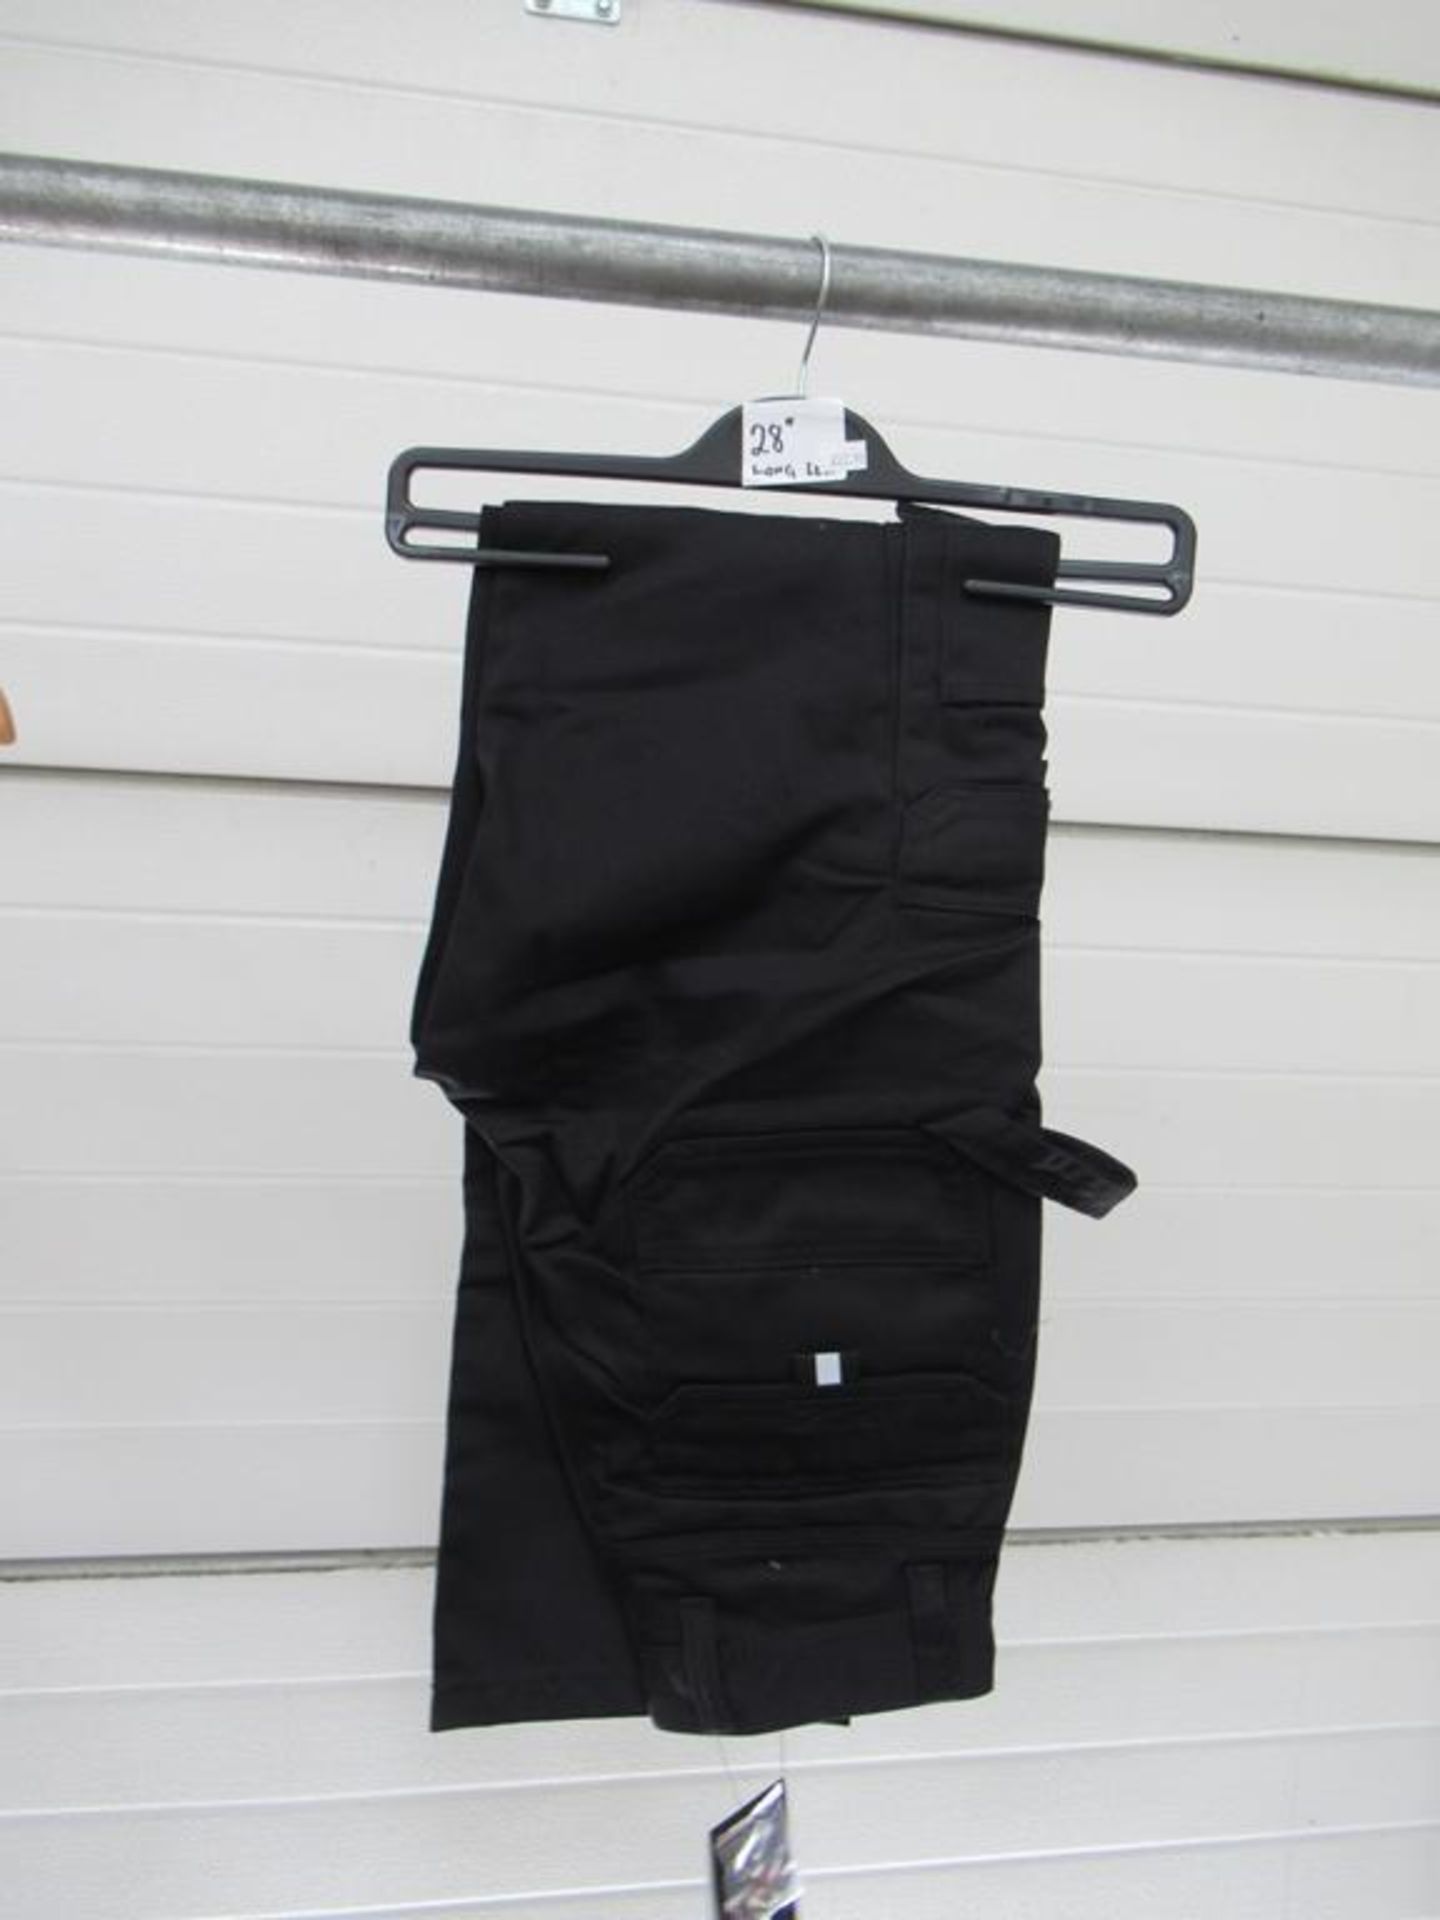 Work Trousers in Black - 32.5" Leg. - Image 3 of 3